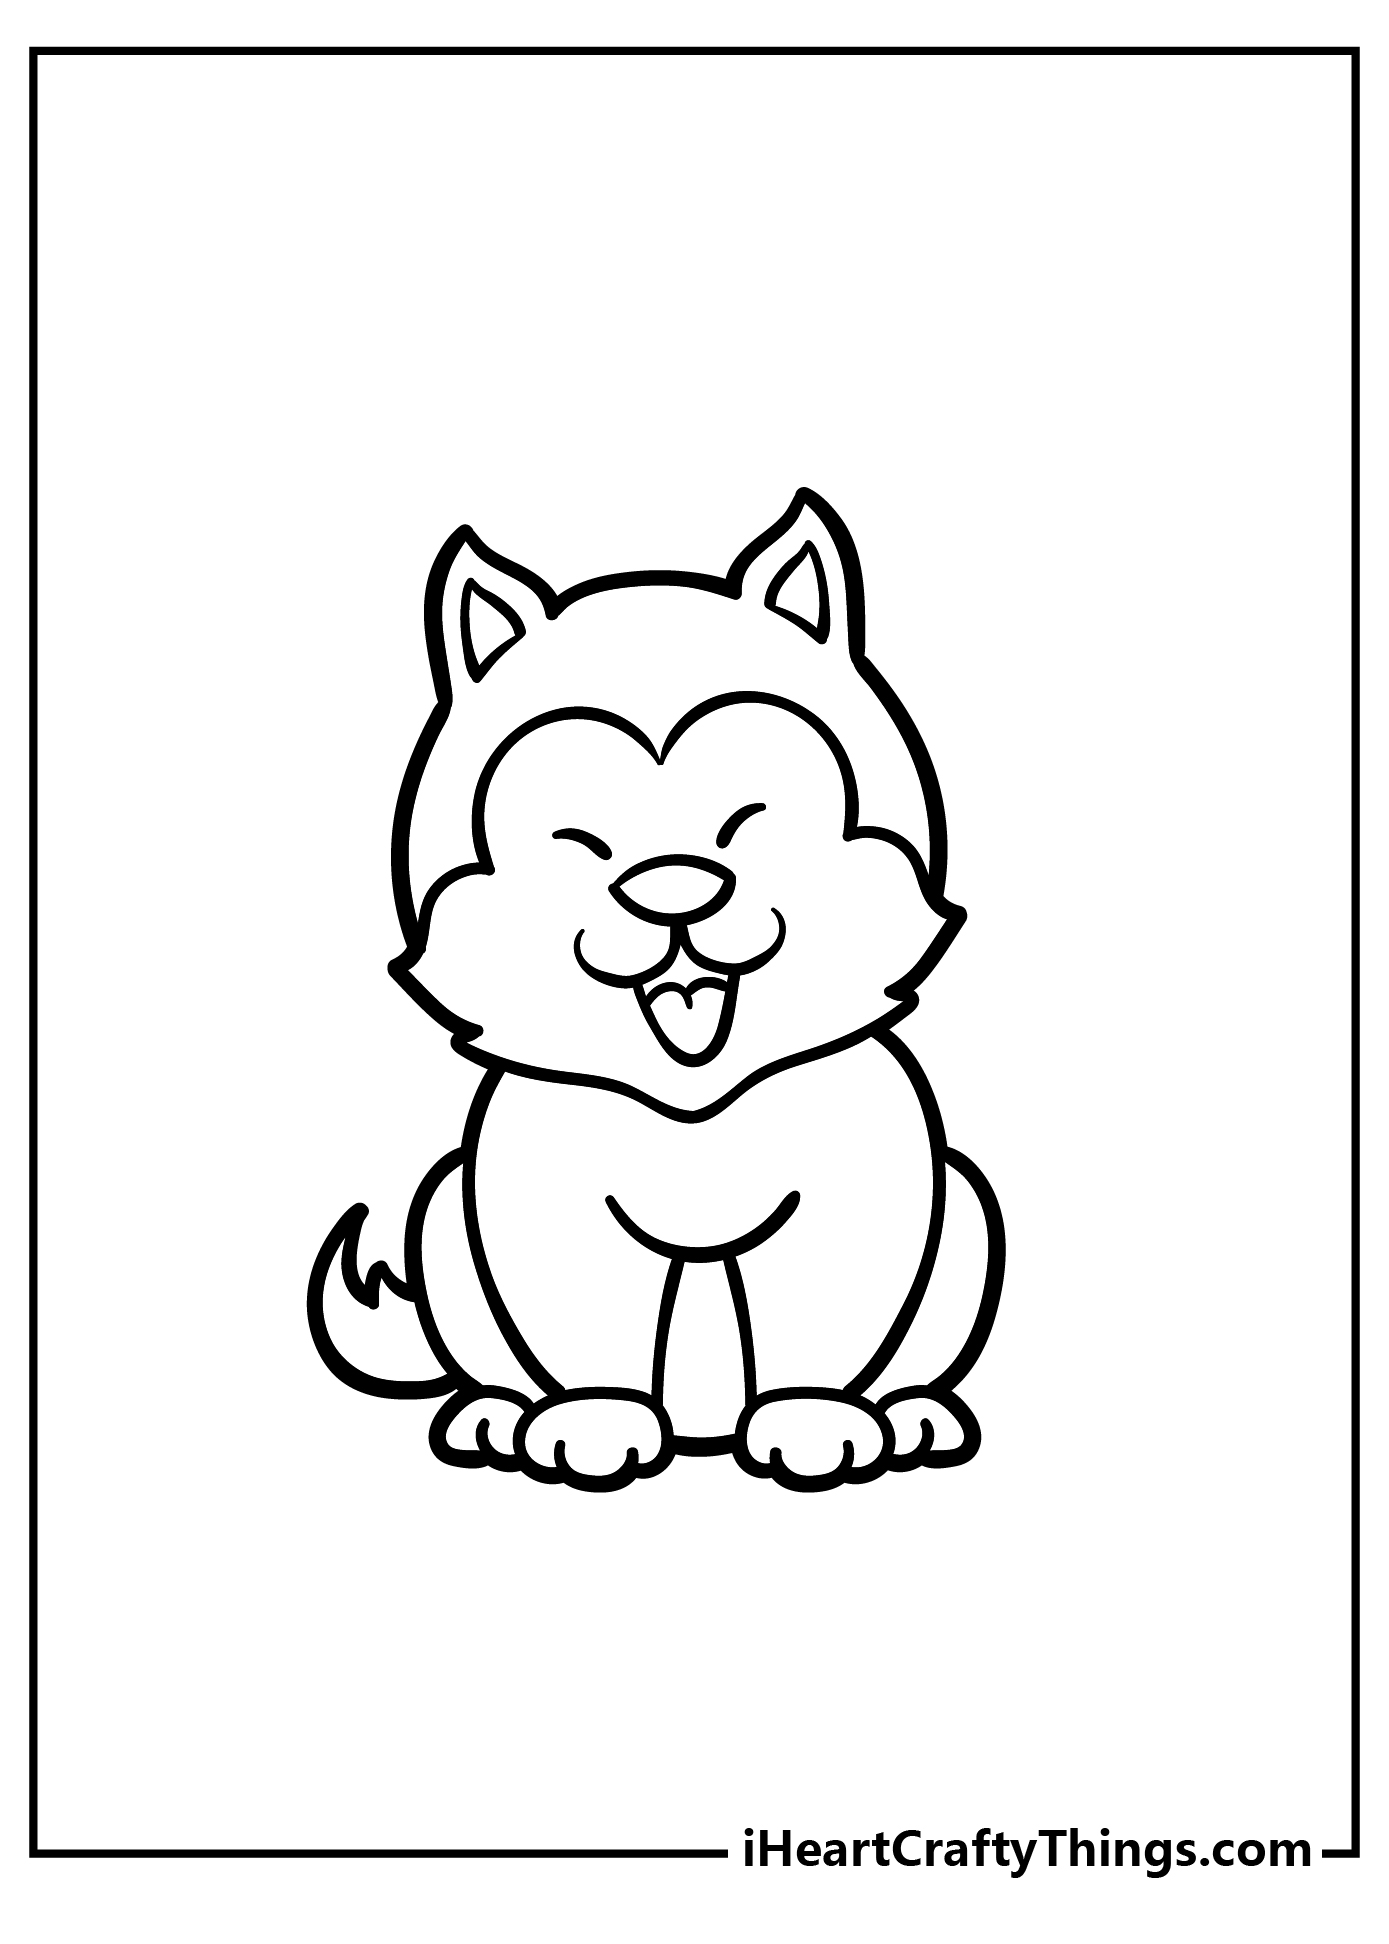 Husky Coloring Pages for kids free download